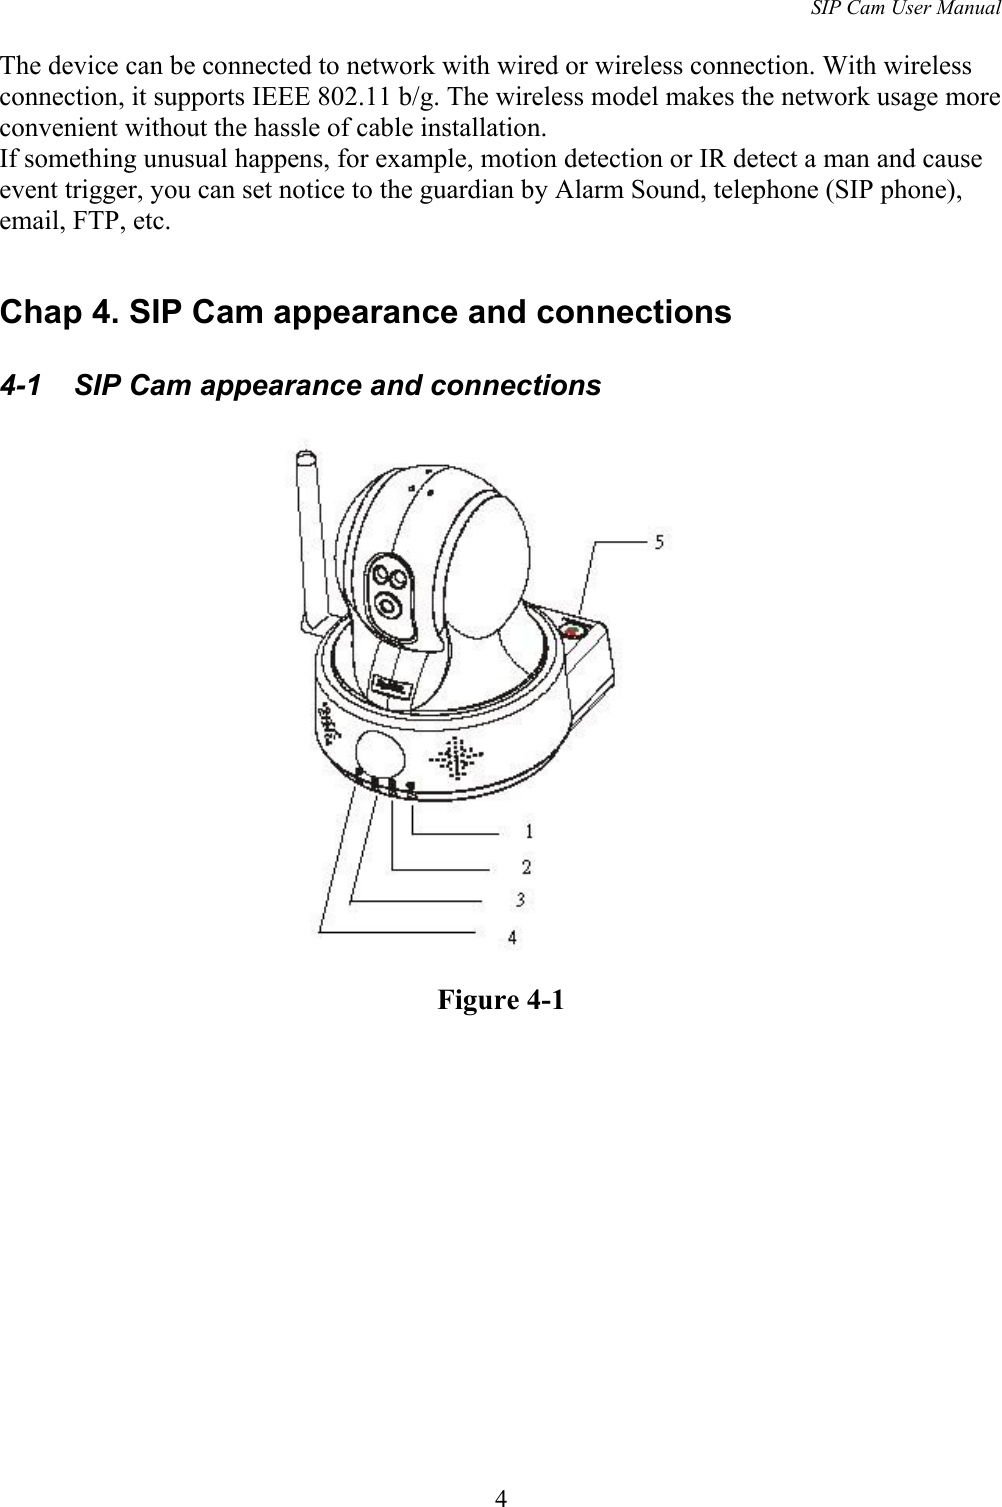 SIP Cam User ManualThe device can be connected to network with wired or wireless connection. With wireless connection, it supports IEEE 802.11 b/g. The wireless model makes the network usage more convenient without the hassle of cable installation.If something unusual happens, for example, motion detection or IR detect a man and cause event trigger, you can set notice to the guardian by Alarm Sound, telephone (SIP phone), email, FTP, etc.Chap 4. SIP Cam appearance and connections4-1  SIP Cam appearance and connectionsFigure 4-14